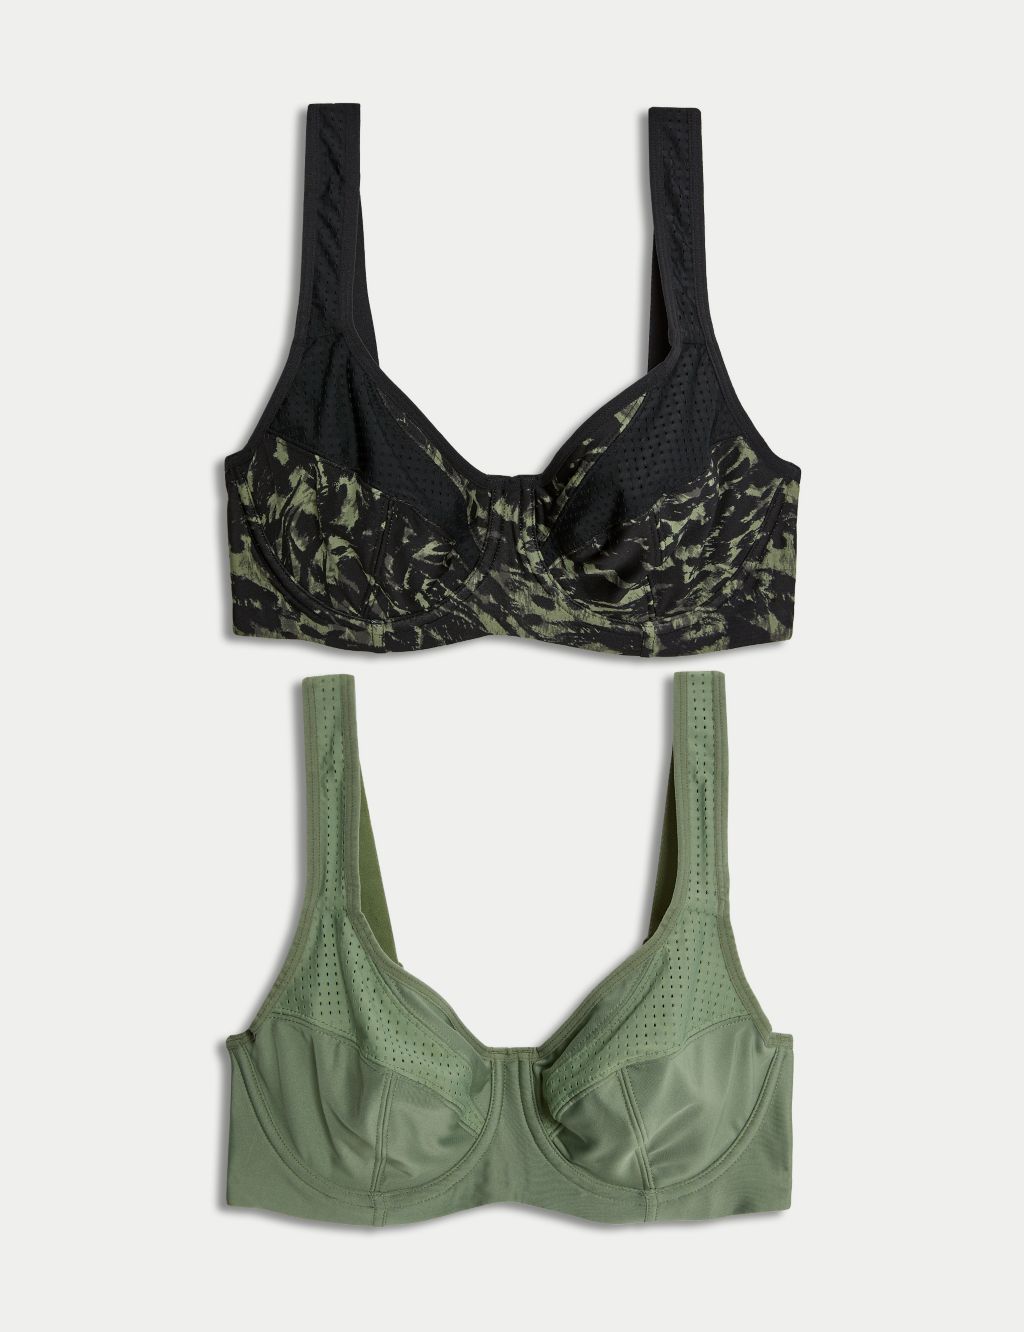 NEW! M&S Good Move Marks & Spencer 2 pack grey/lime high impact sports bras